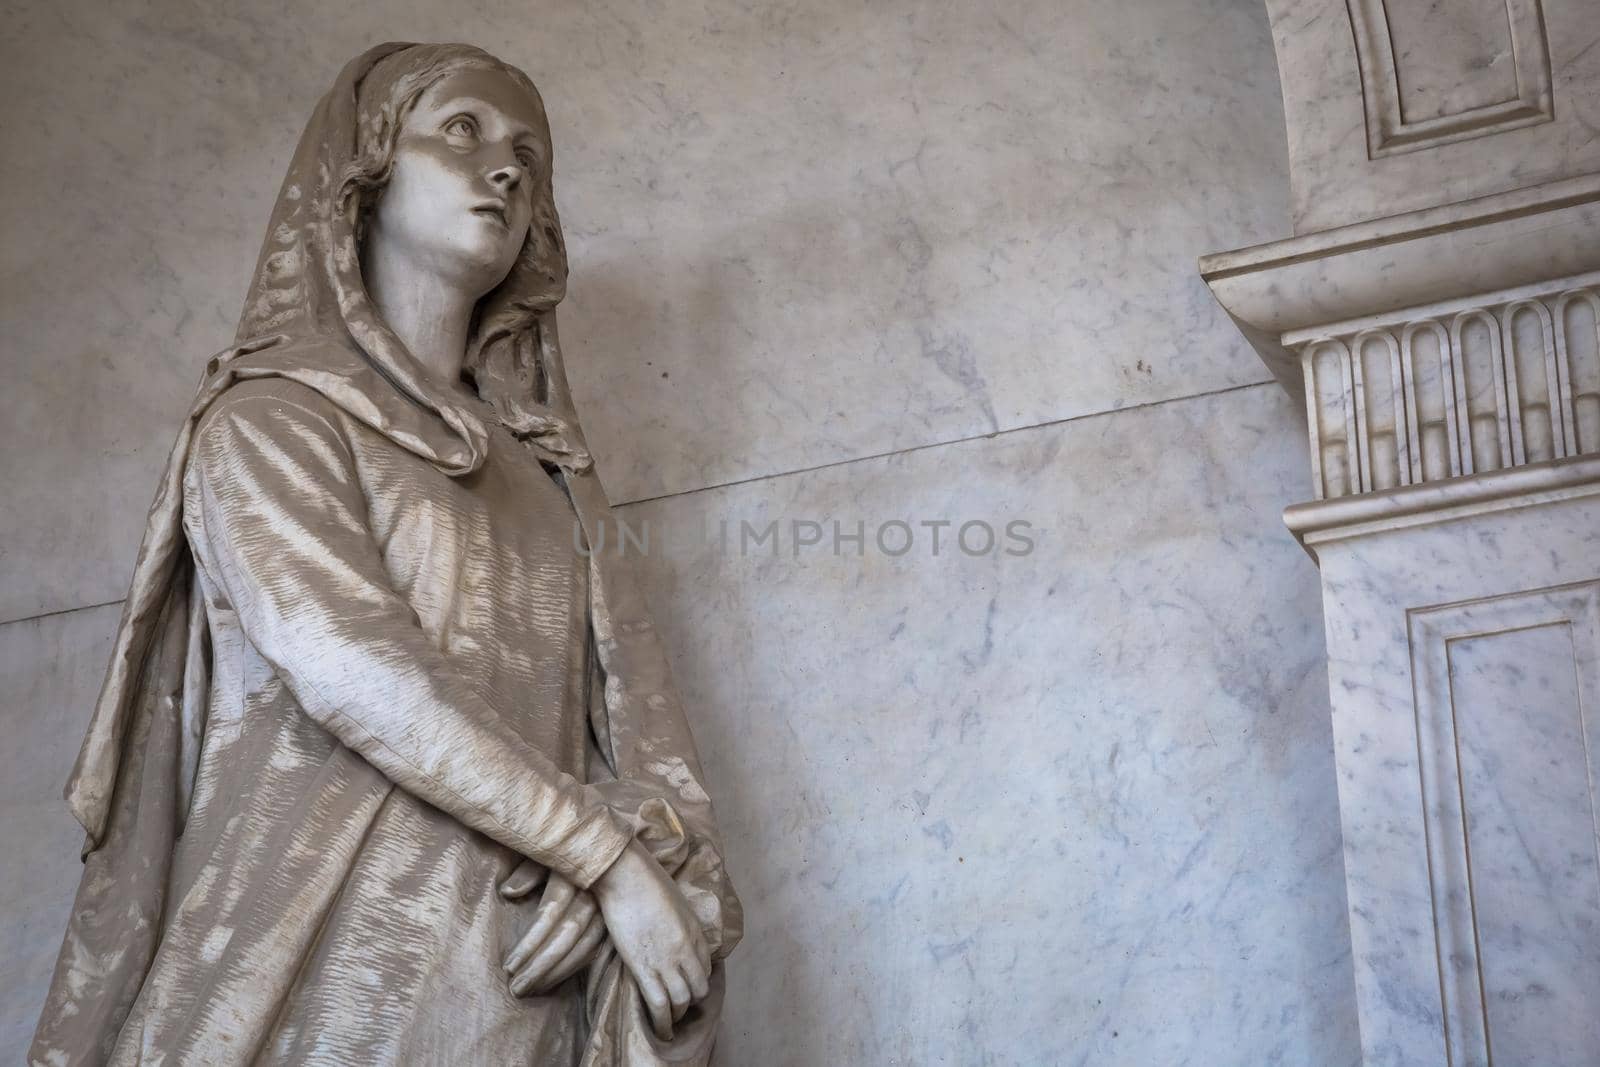 GENOA, ITALY - June 2020: antique statue, beginning 1800, made of marble, in a Christian Catholic cemetery - Italy